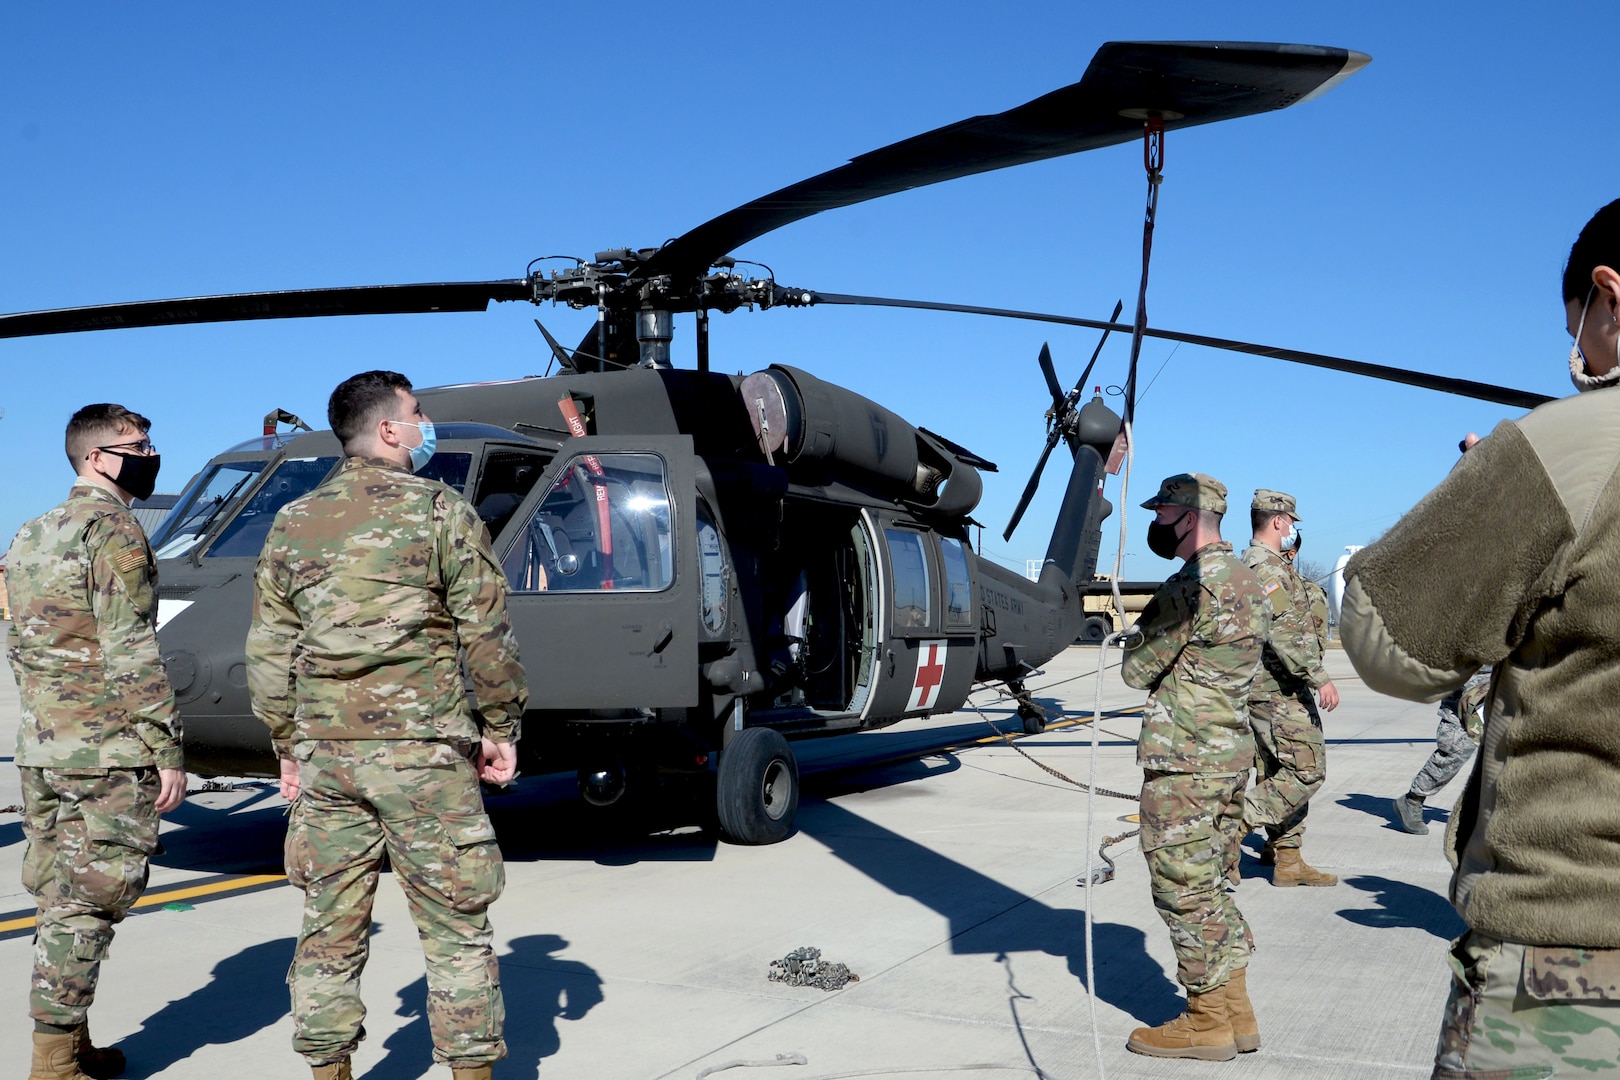 Operation Nightstorm ground crew members familiarize themselves with a UH-60 Black Hawk helicopter in preparation for sling loading cargo Dec. 14, 2020, at Martindale Army Air Field, San Antonio, Texas. (U.S. Air Force photo by Tech. Sgt. Samantha Mathison)